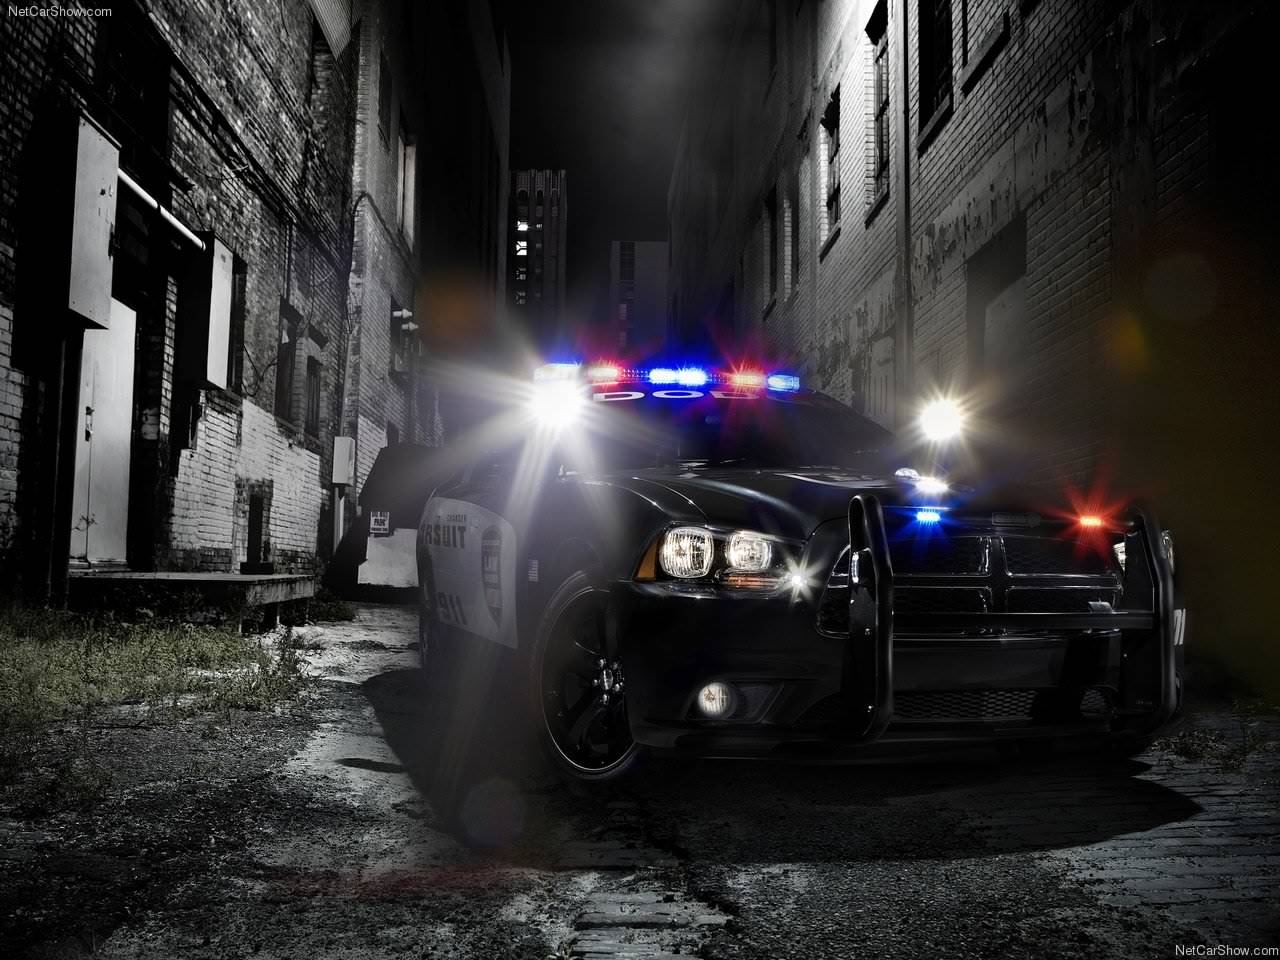 232500 Police Stock Photos Pictures  RoyaltyFree Images  iStock   Police lights Uk police Police car